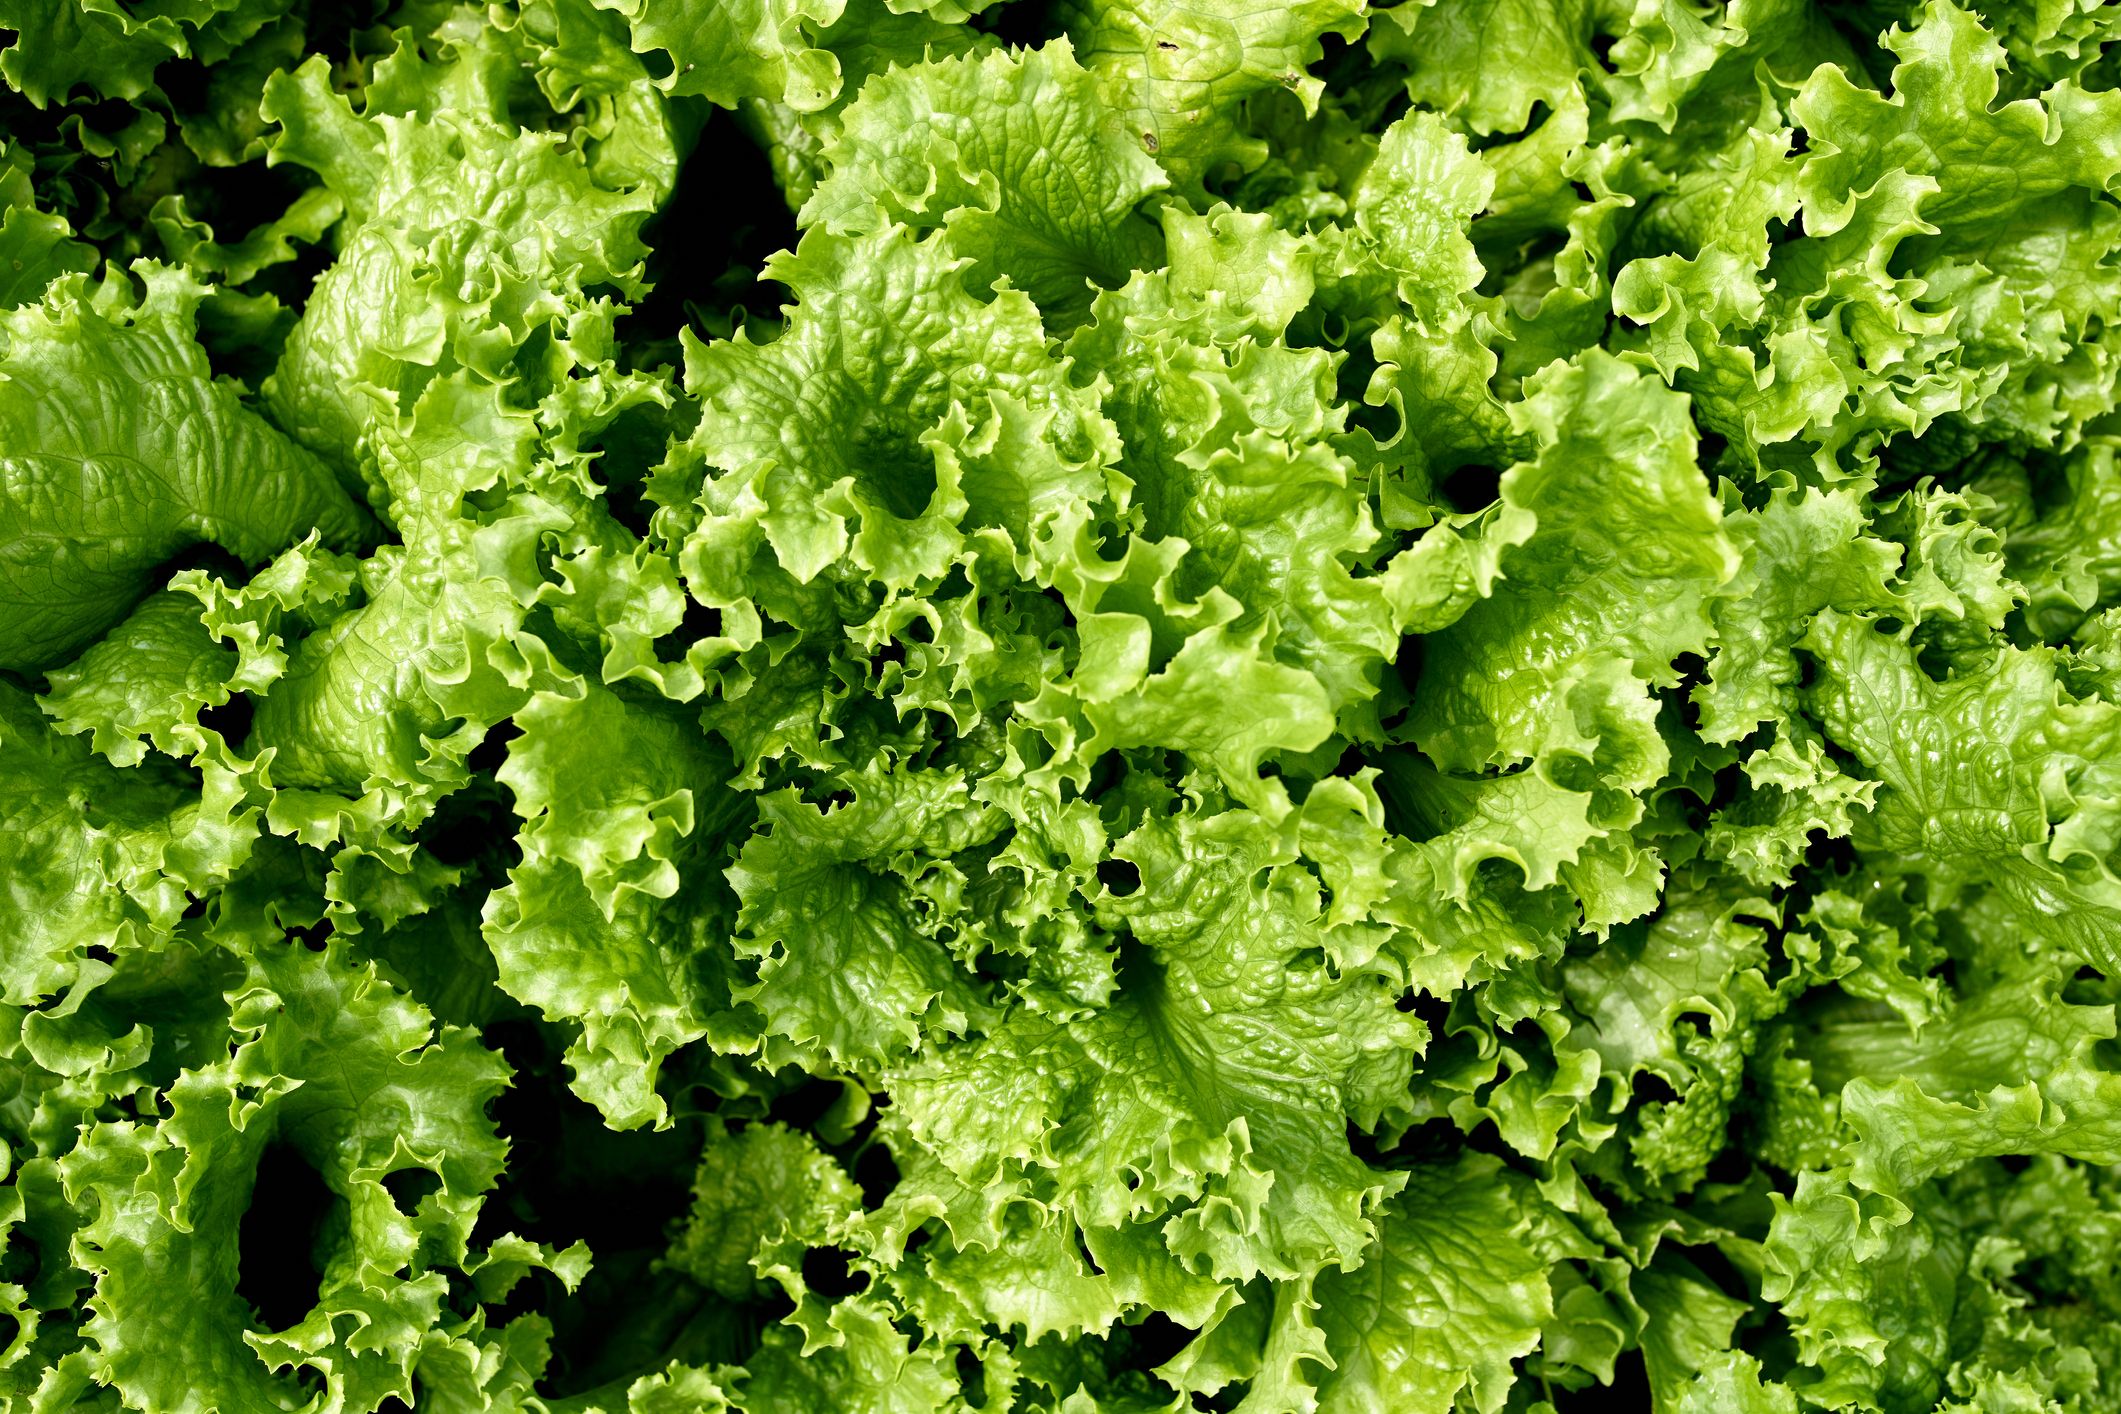 How To Store Lettuce to Keep It Fresh and Crisp